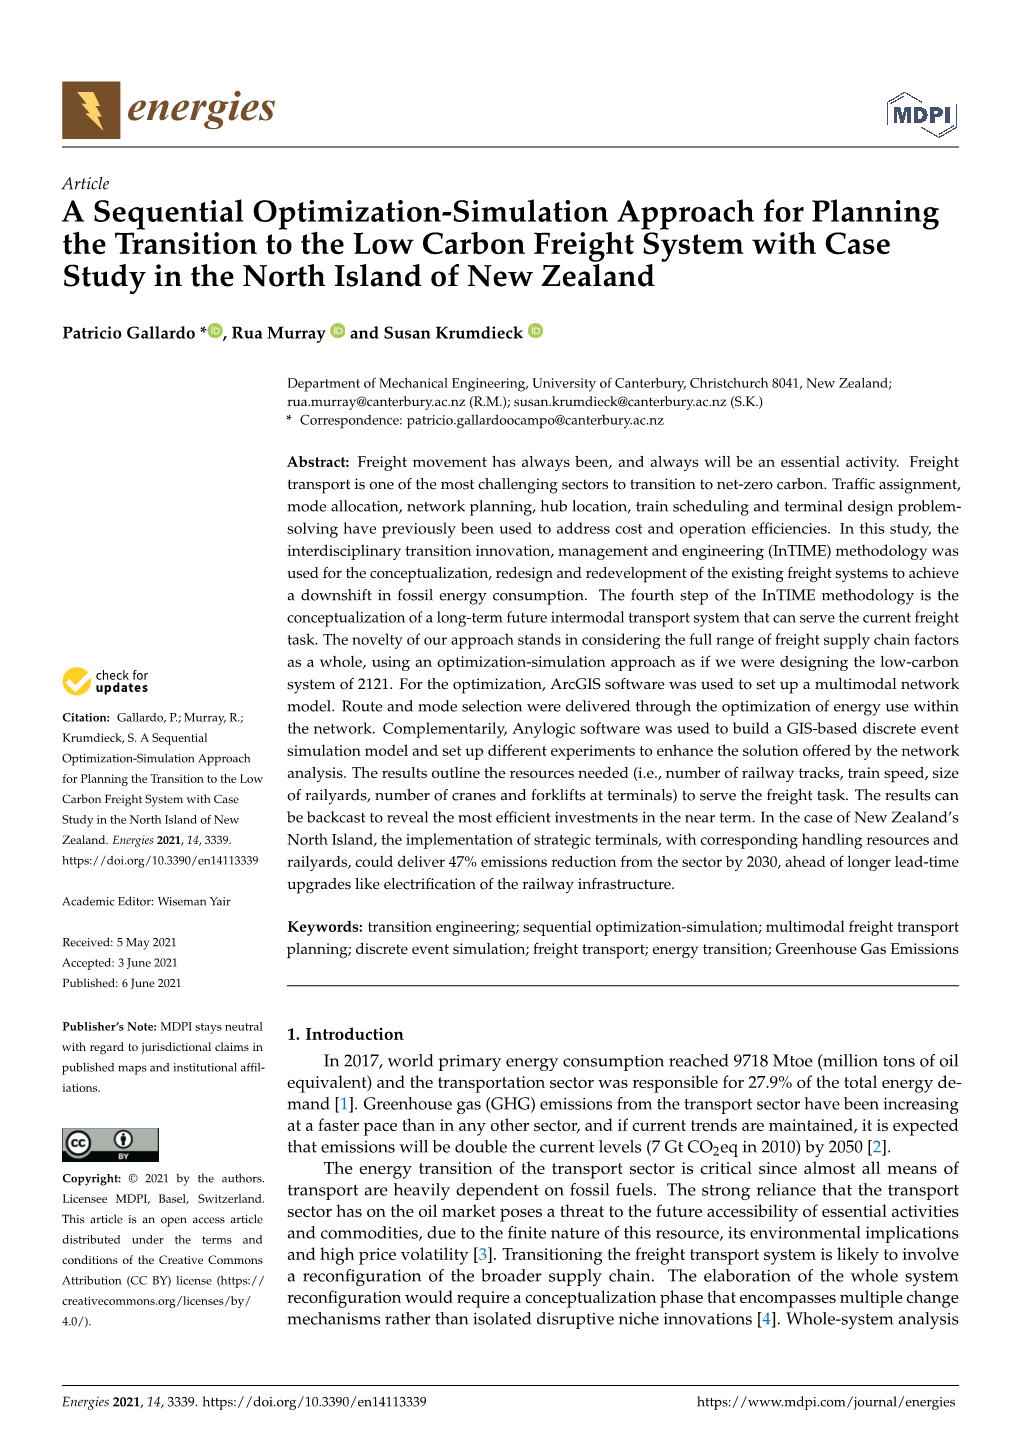 A Sequential Optimization-Simulation Approach for Planning the Transition to the Low Carbon Freight System with Case Study in the North Island of New Zealand